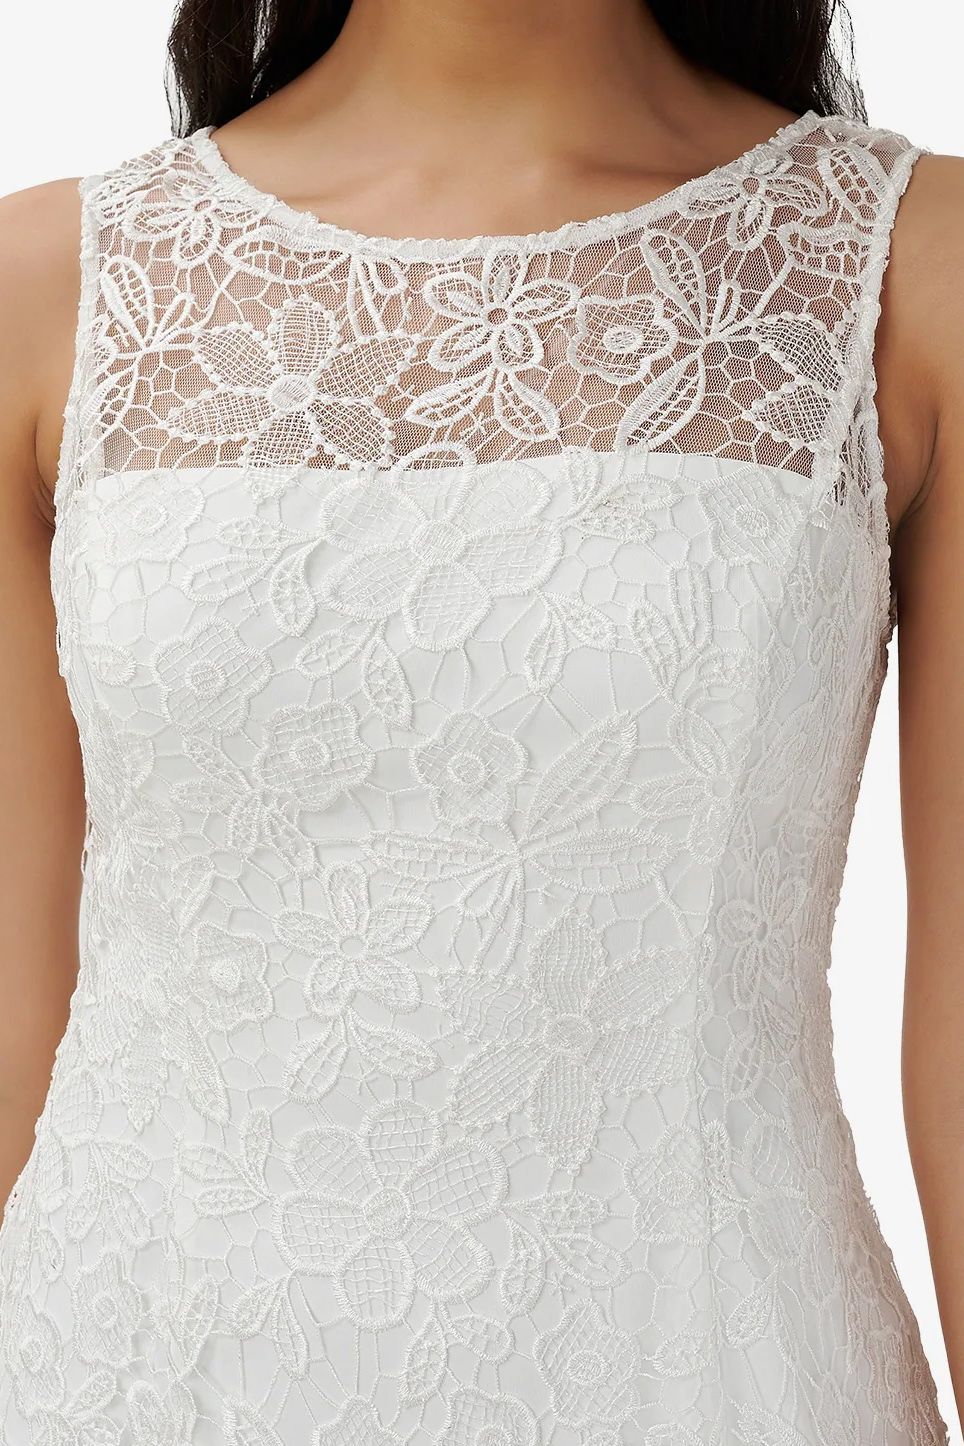 Cocktail Dresses Short Sleeveless Lace Cocktail Dress IVORY